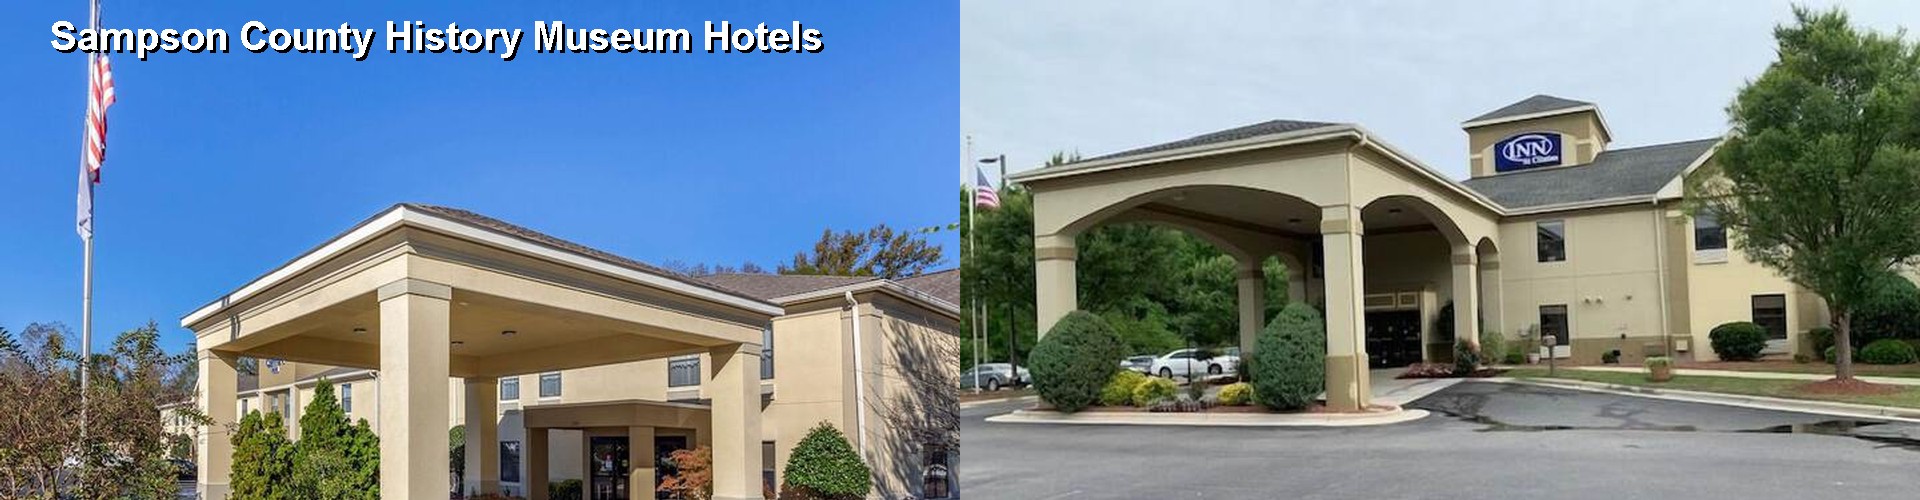 3 Best Hotels near Sampson County History Museum